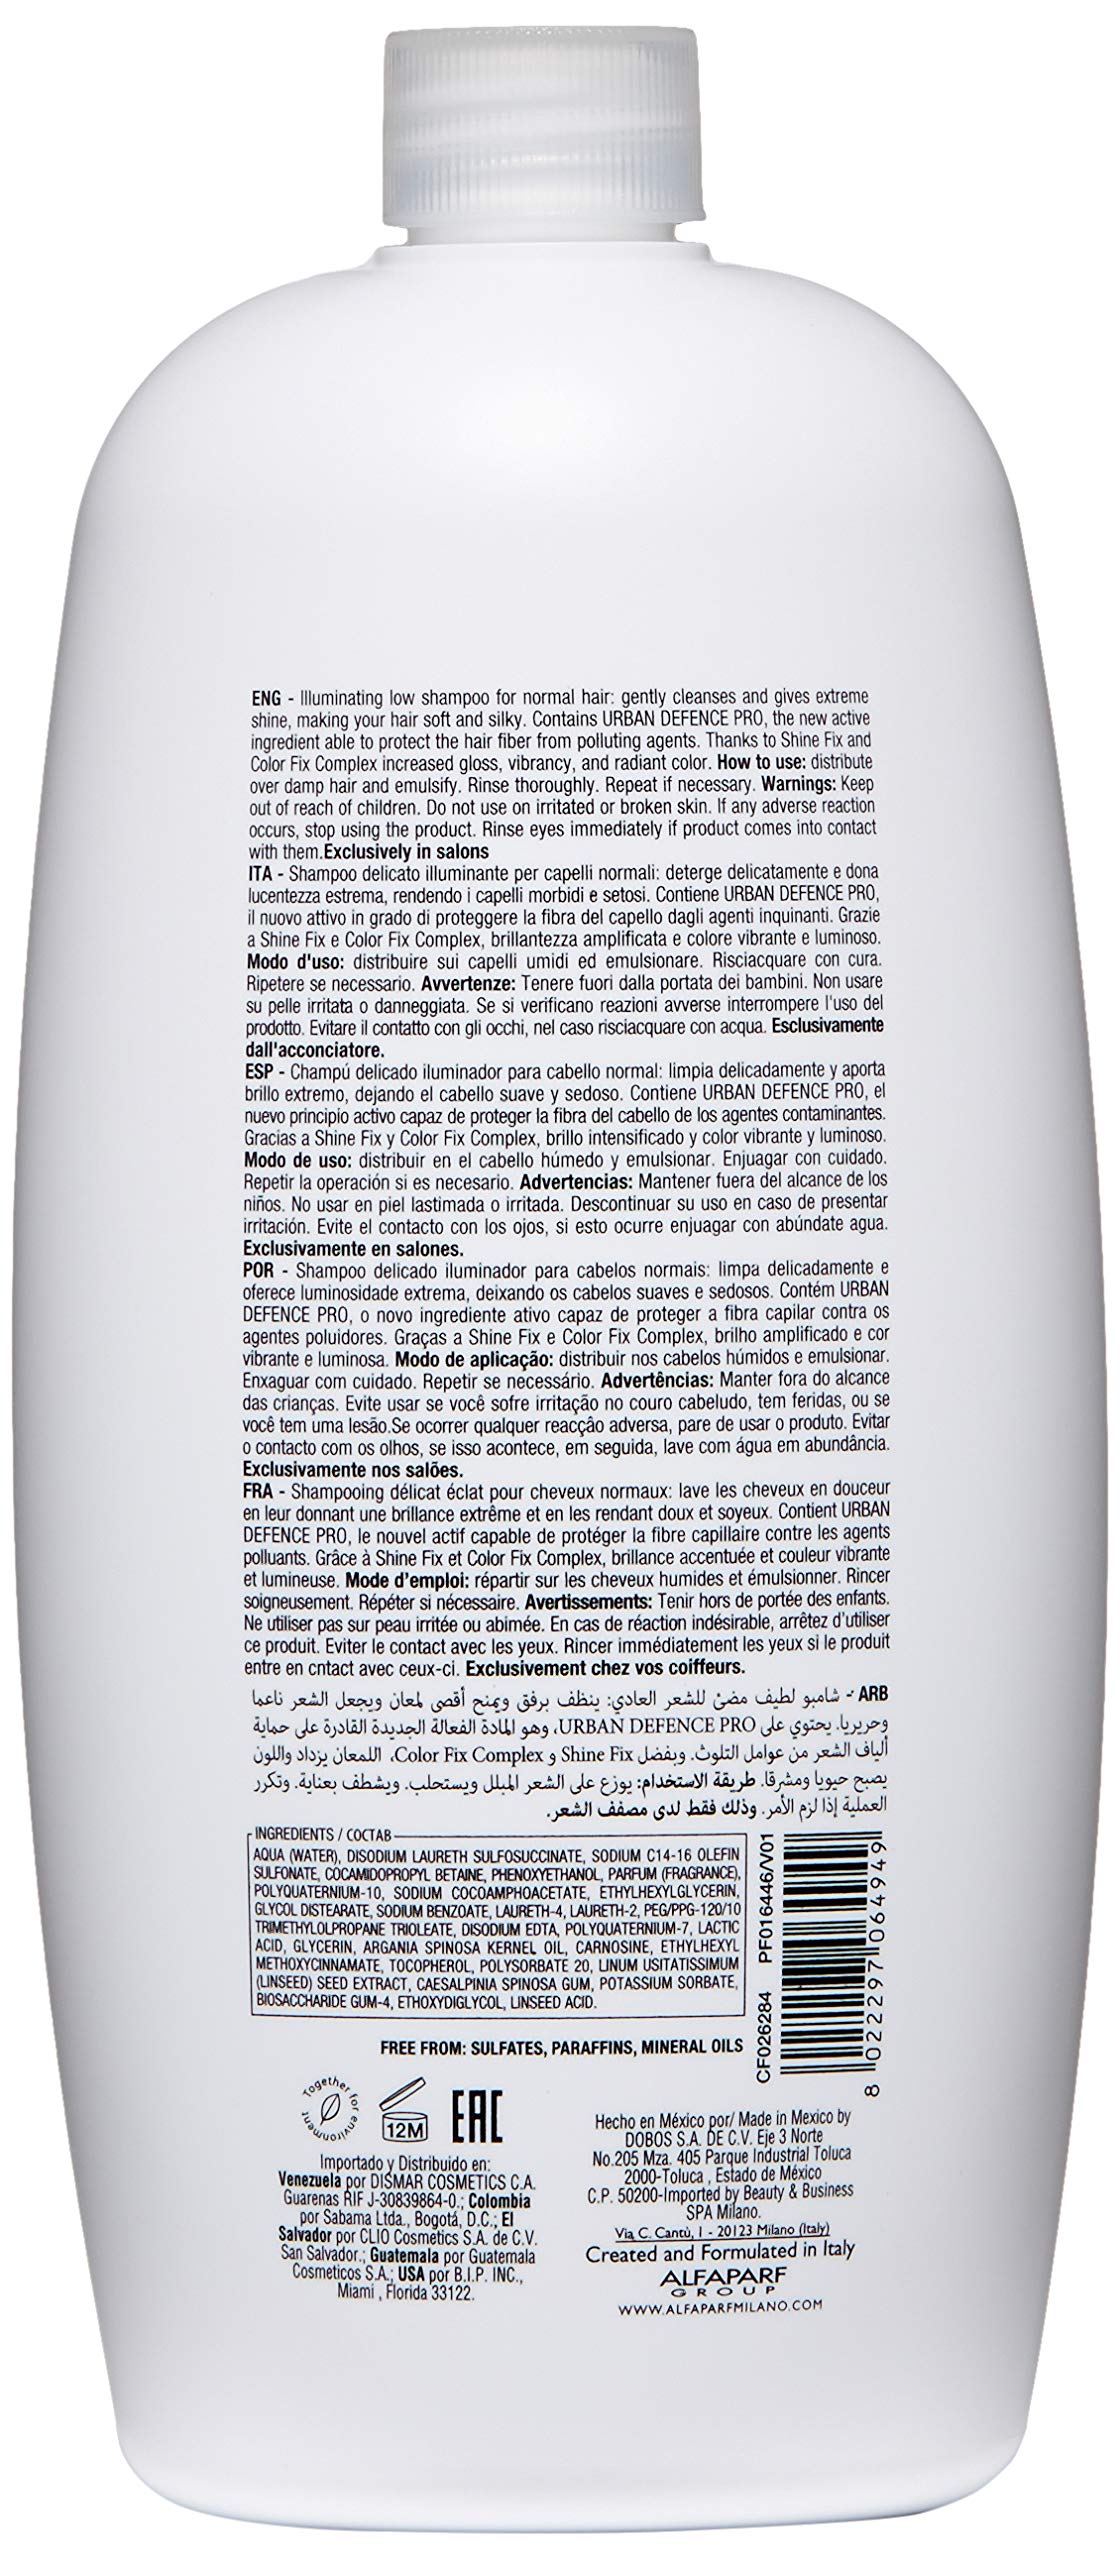 Alfaparf Milano Semi Di Lino Diamond Shine Illuminating Low Shampoo - Sulfate Free - For Normal Hair - Paraben and Paraffin Free - Safe on Color Treated Hair - Professional Salon Quality